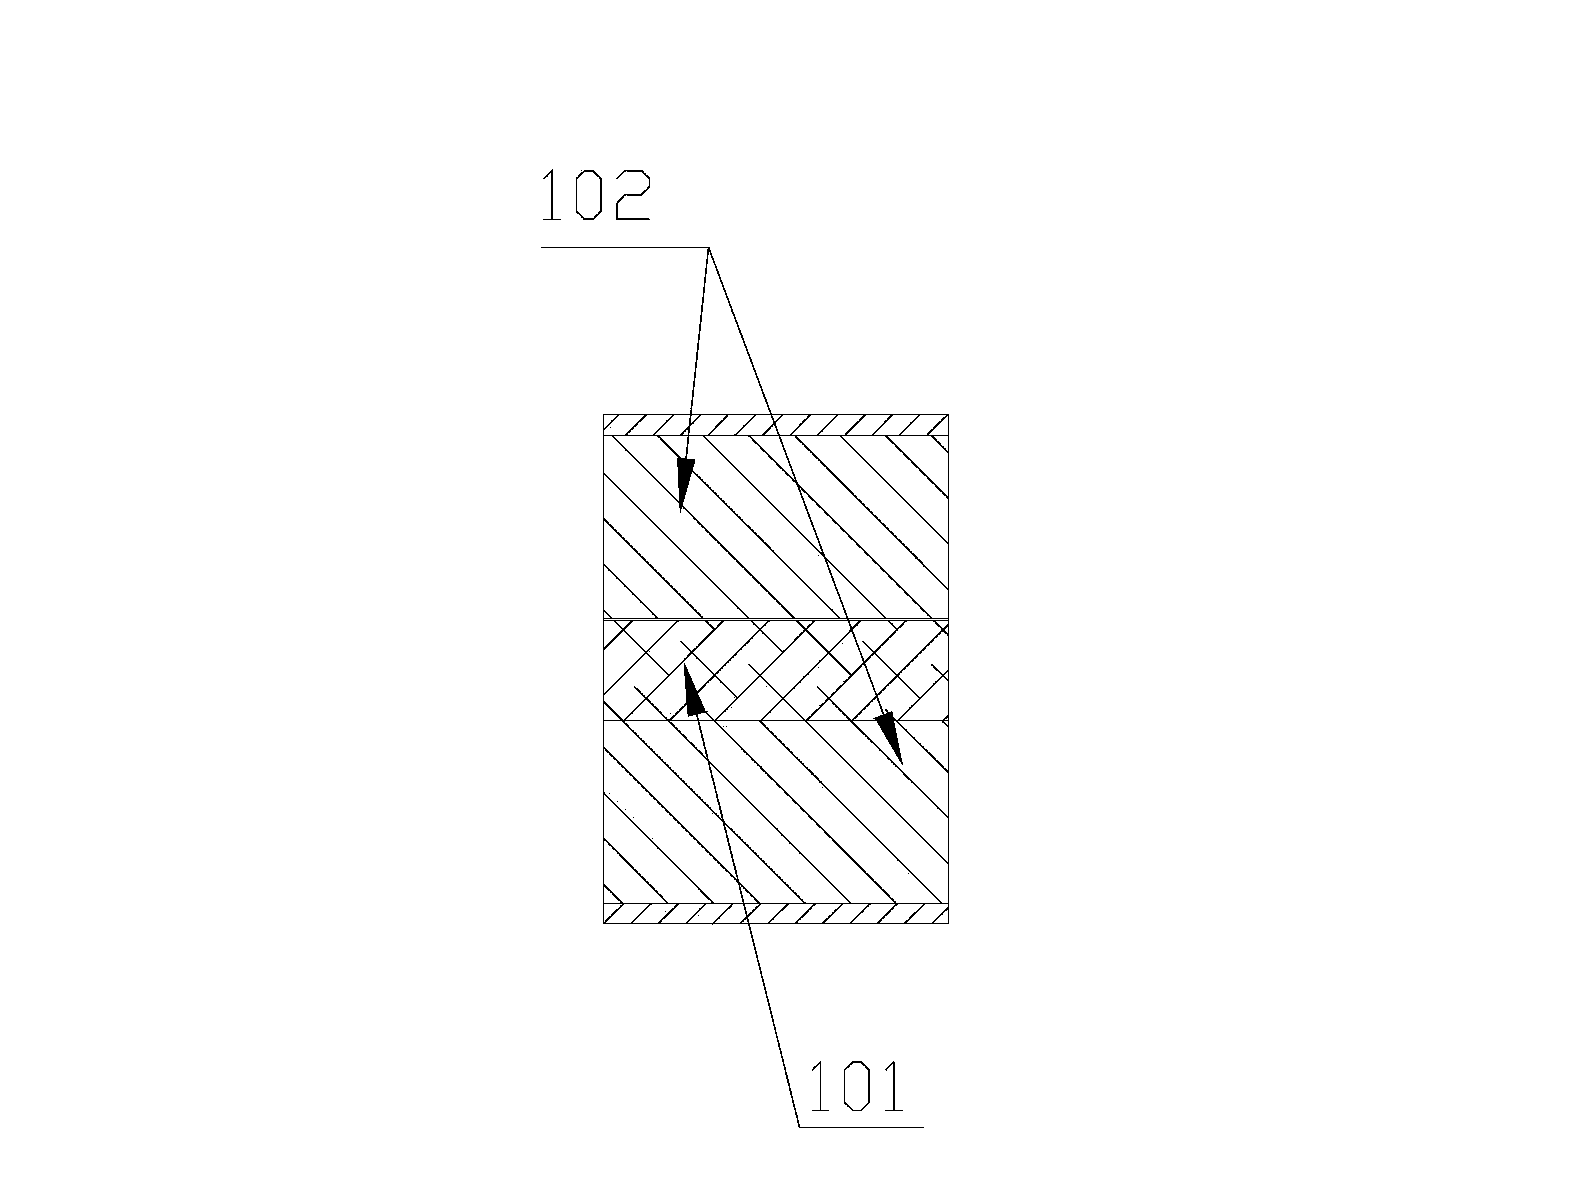 Electric heating device and air conditioner